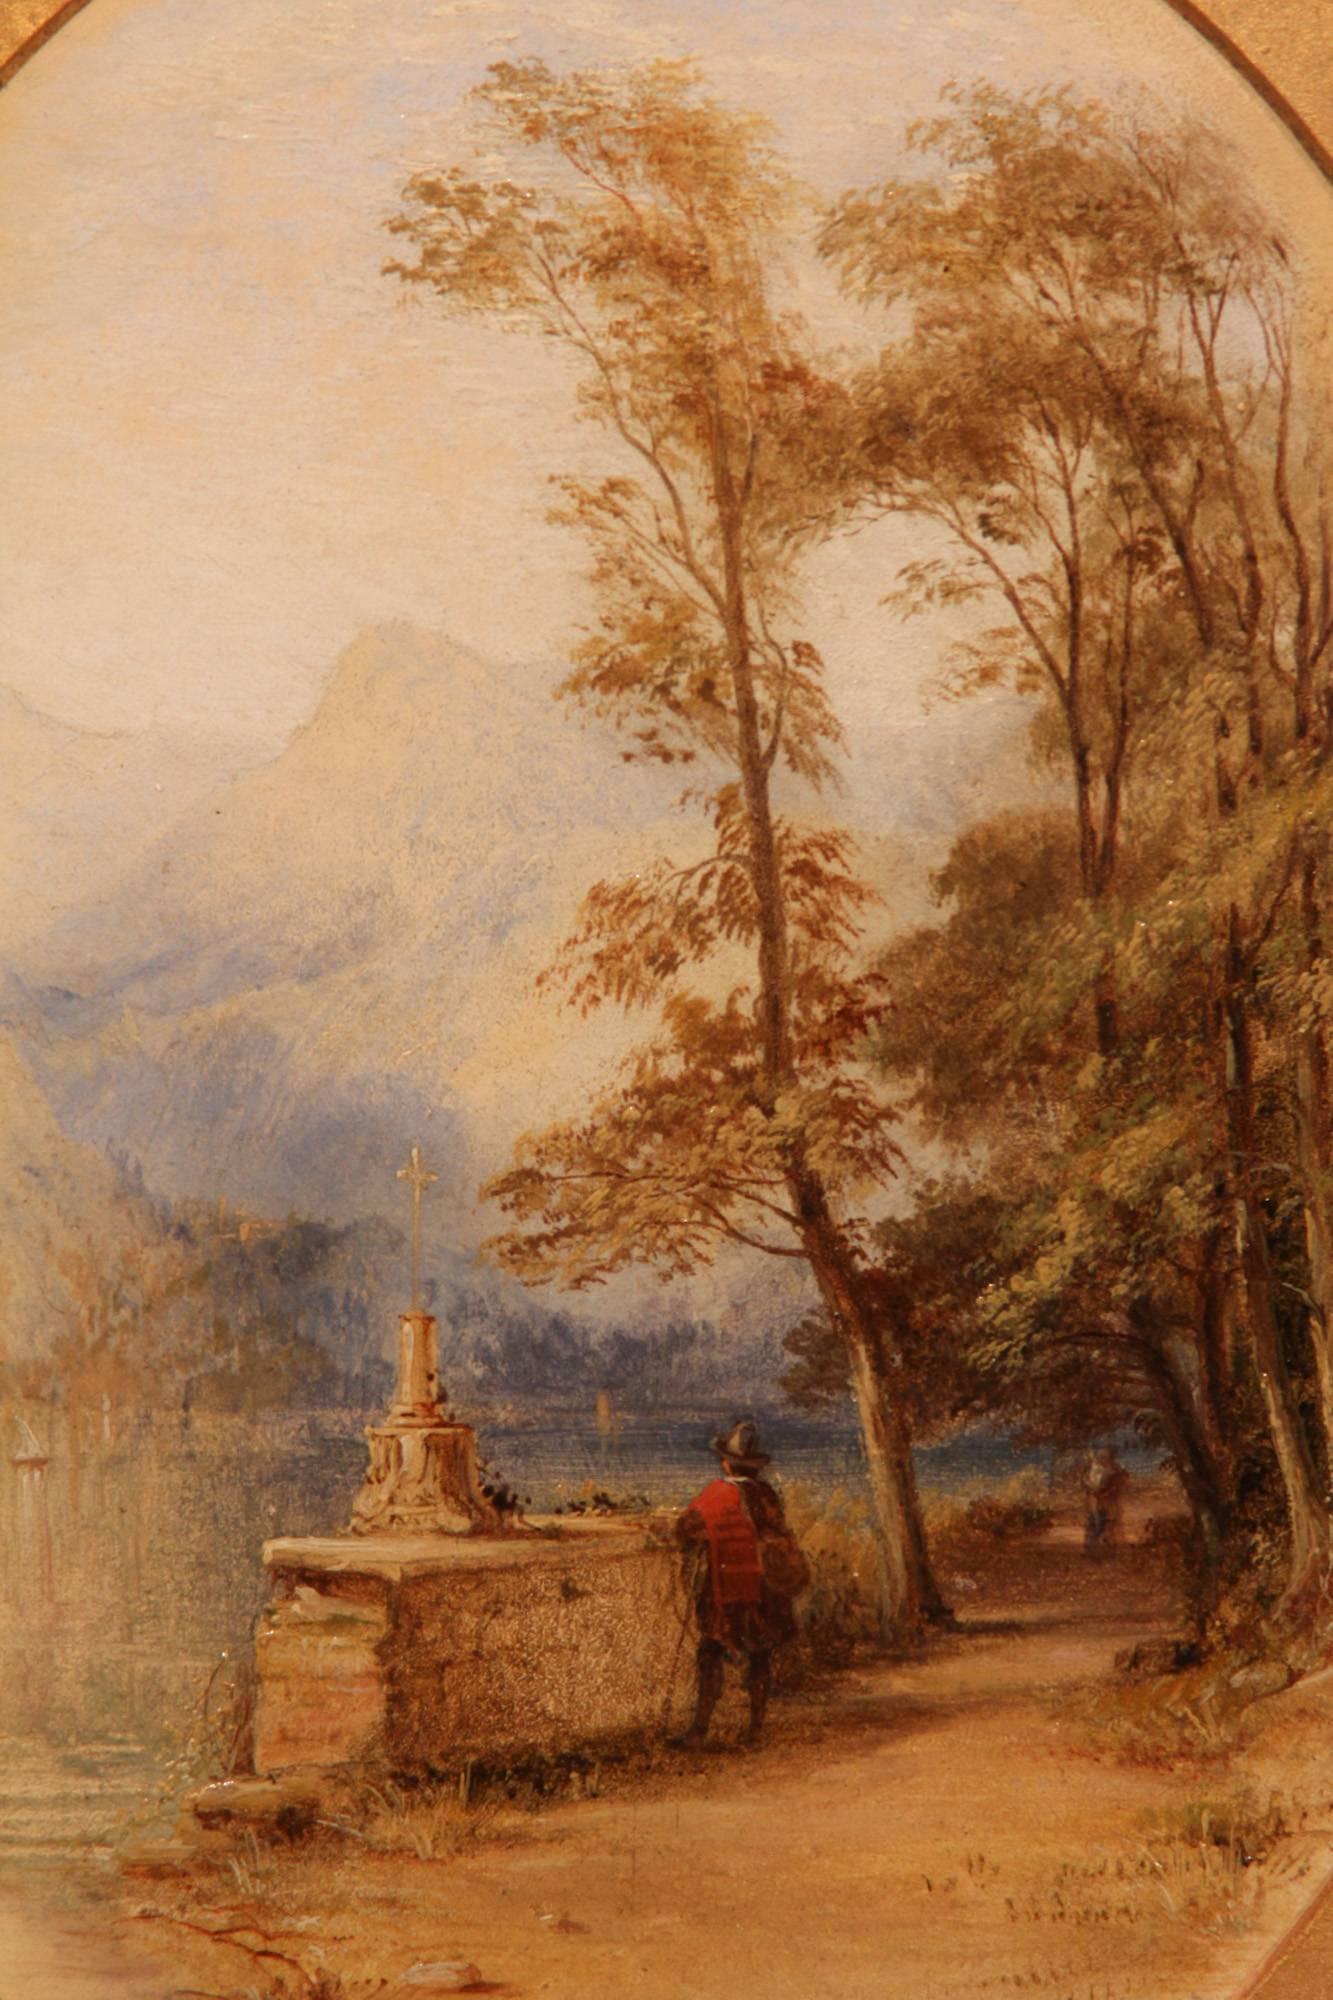 "On the Lake of Como" oil painting by George Edwards Hering. George Edwards Hering, 1805-1879 was a leading exhibitor Royal Academy, oil on board. 8x10" oval, signed title inscribed verso.

All of the items that we advertise for